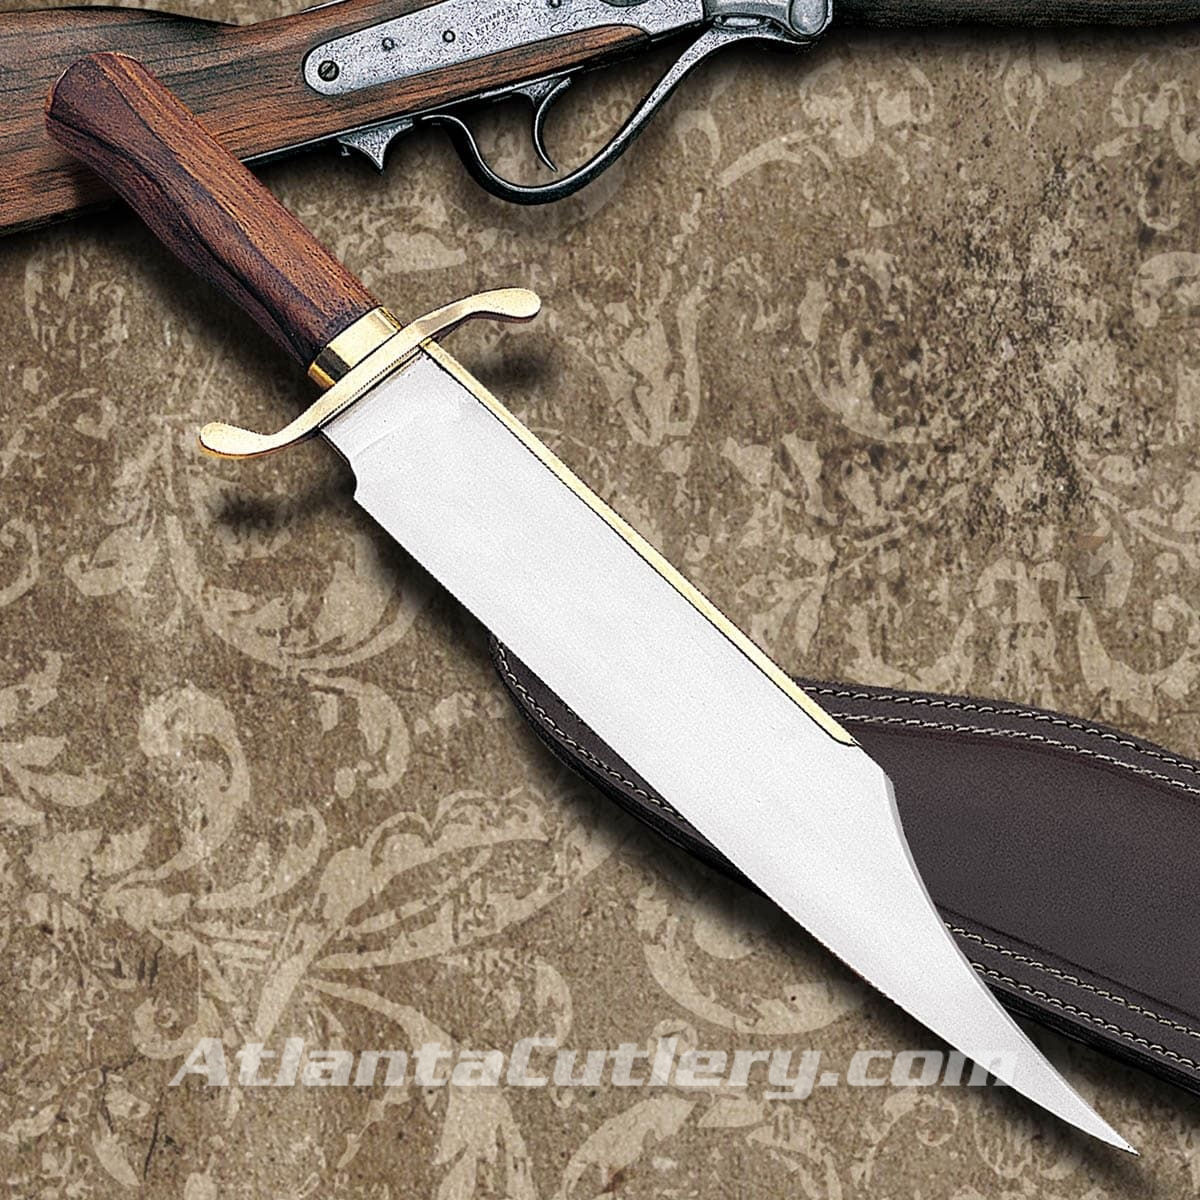 Primitive Bowie Knife and Scabbard